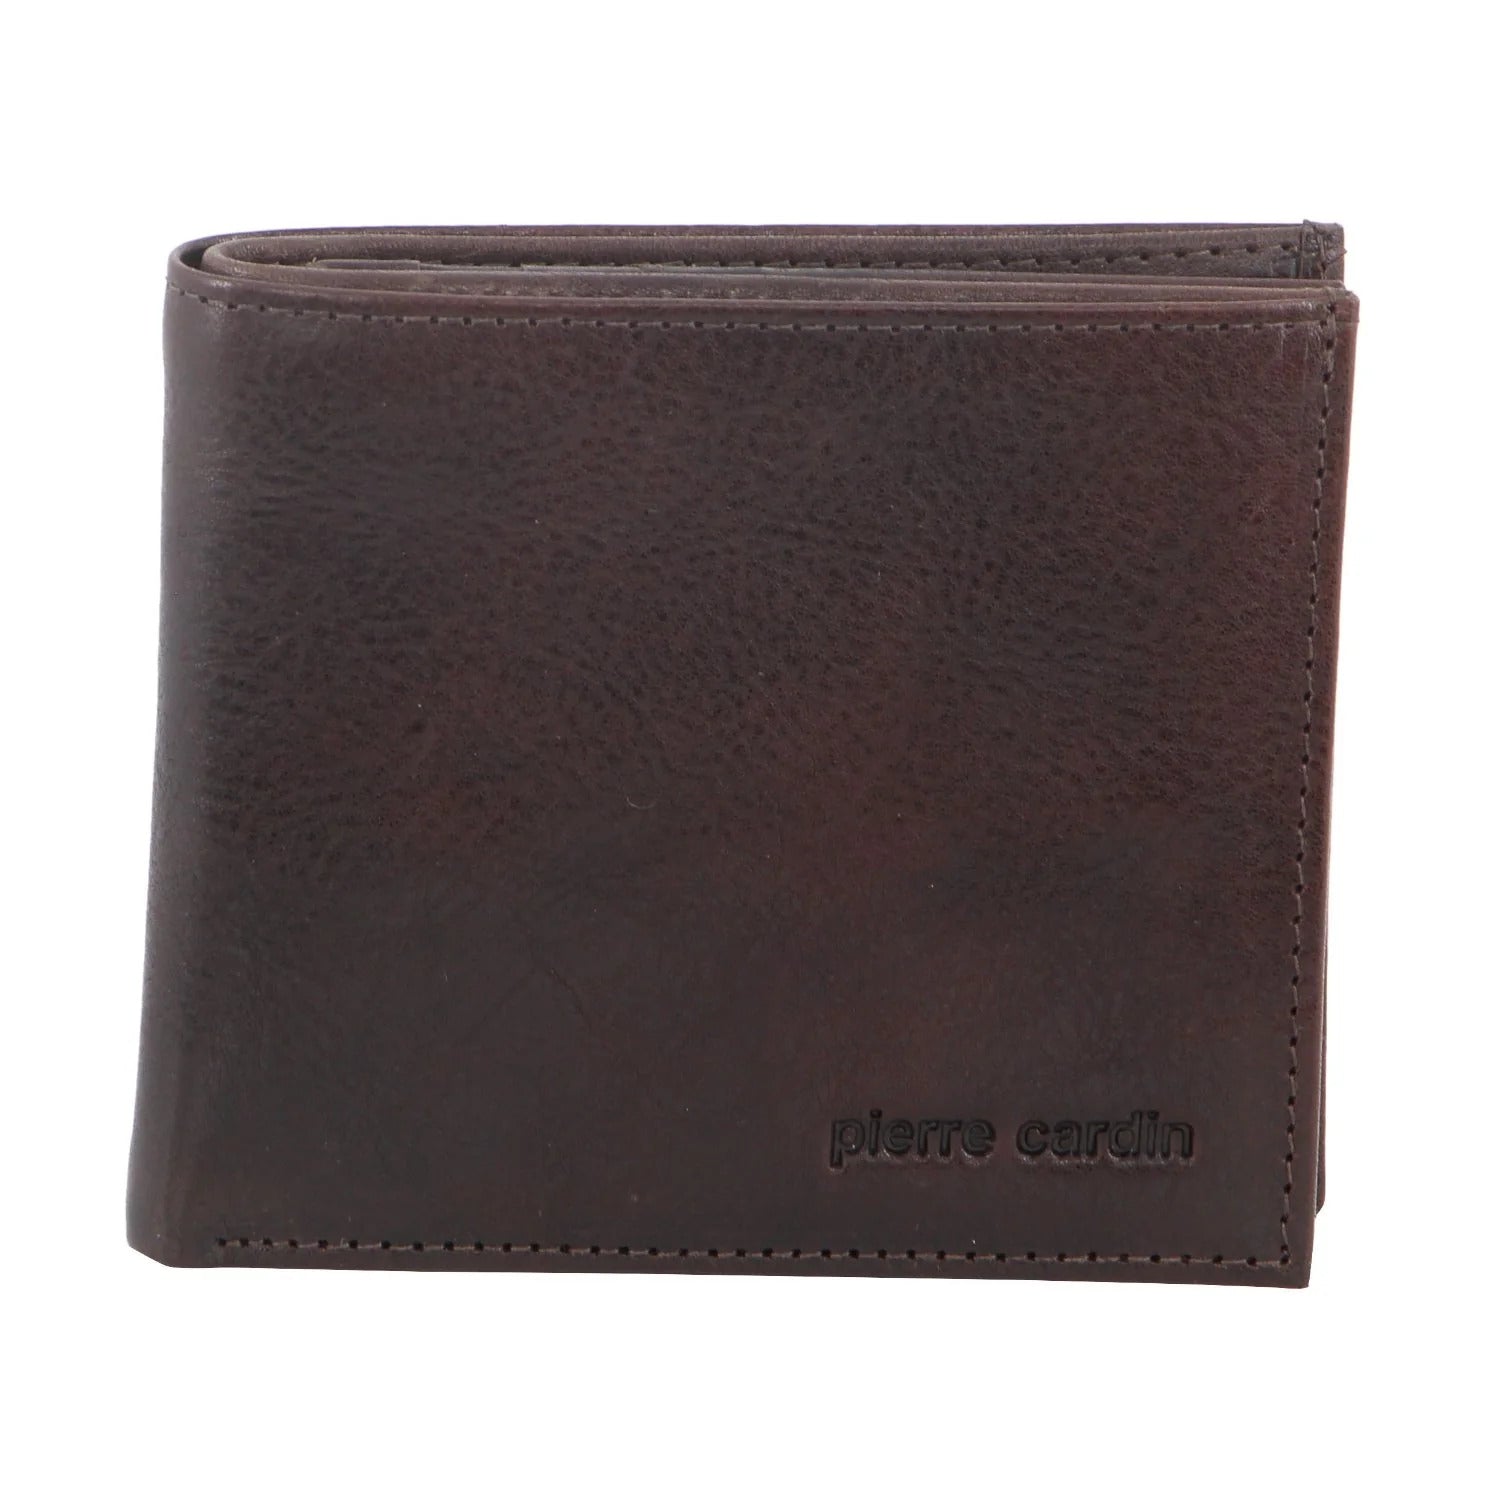 Pierre Cardin Mens Wallet Tri Fold Leather w/ RFID Protection - Chocolate